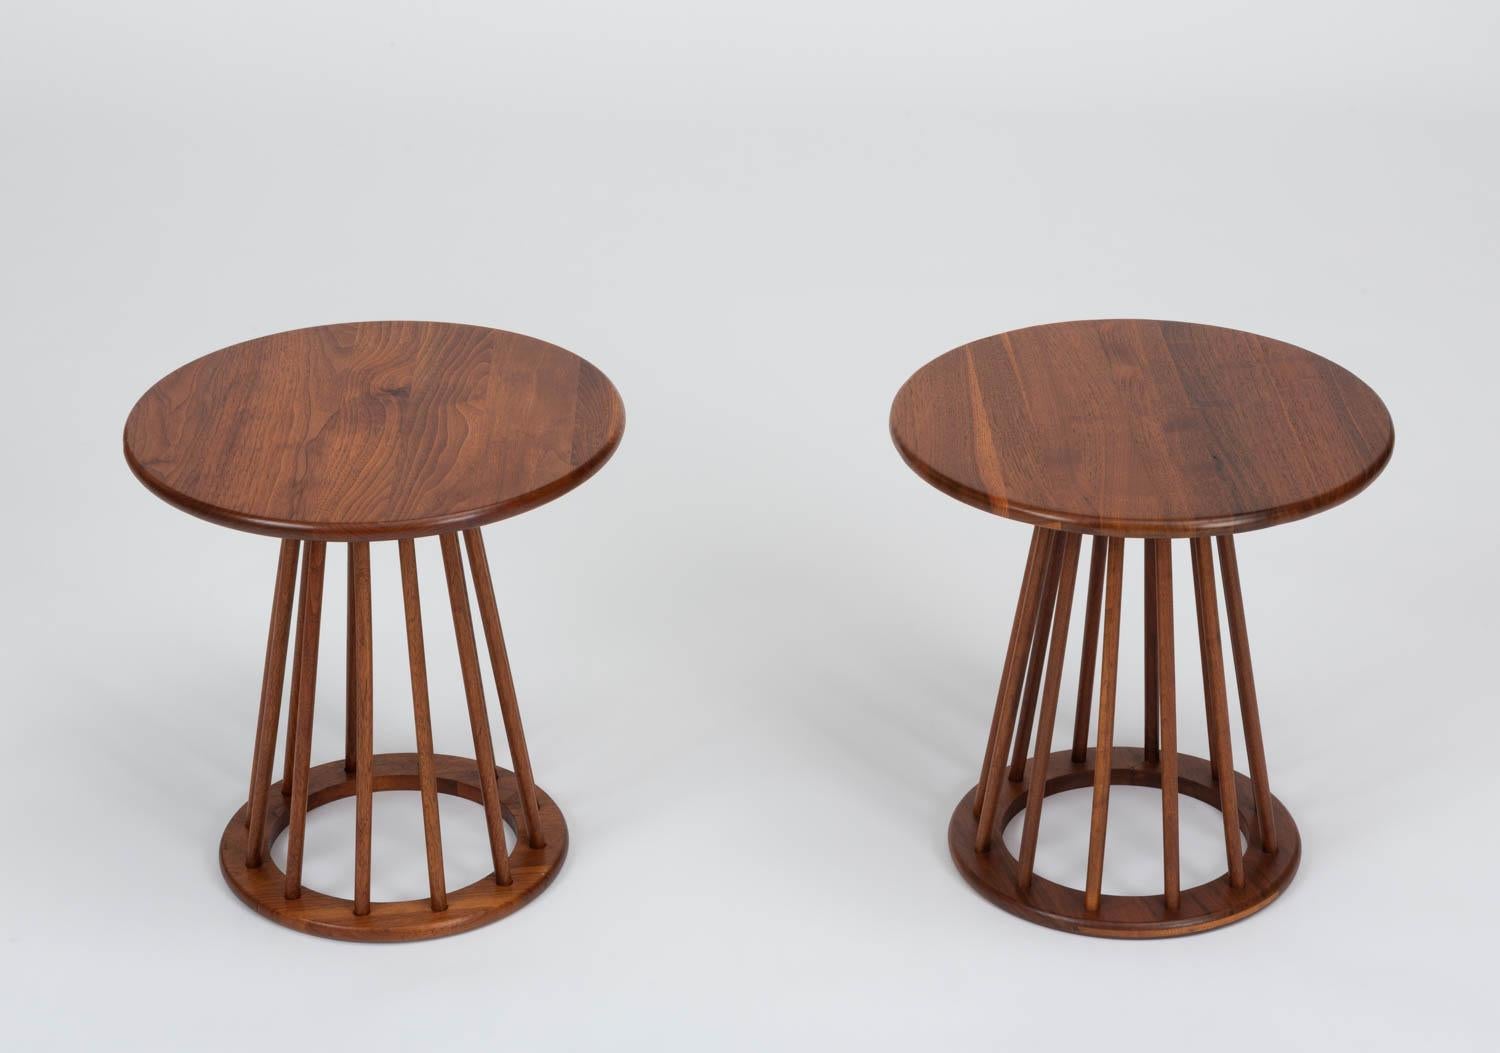 A pair of simply constructed side tables from the late 1950s by Arthur Umanoff for New Jersey-based Washington Woodcraft. The tables feature a round, bull-nosed surface of solid walnut supported by a pedestal base, a smaller ring in matching walnut